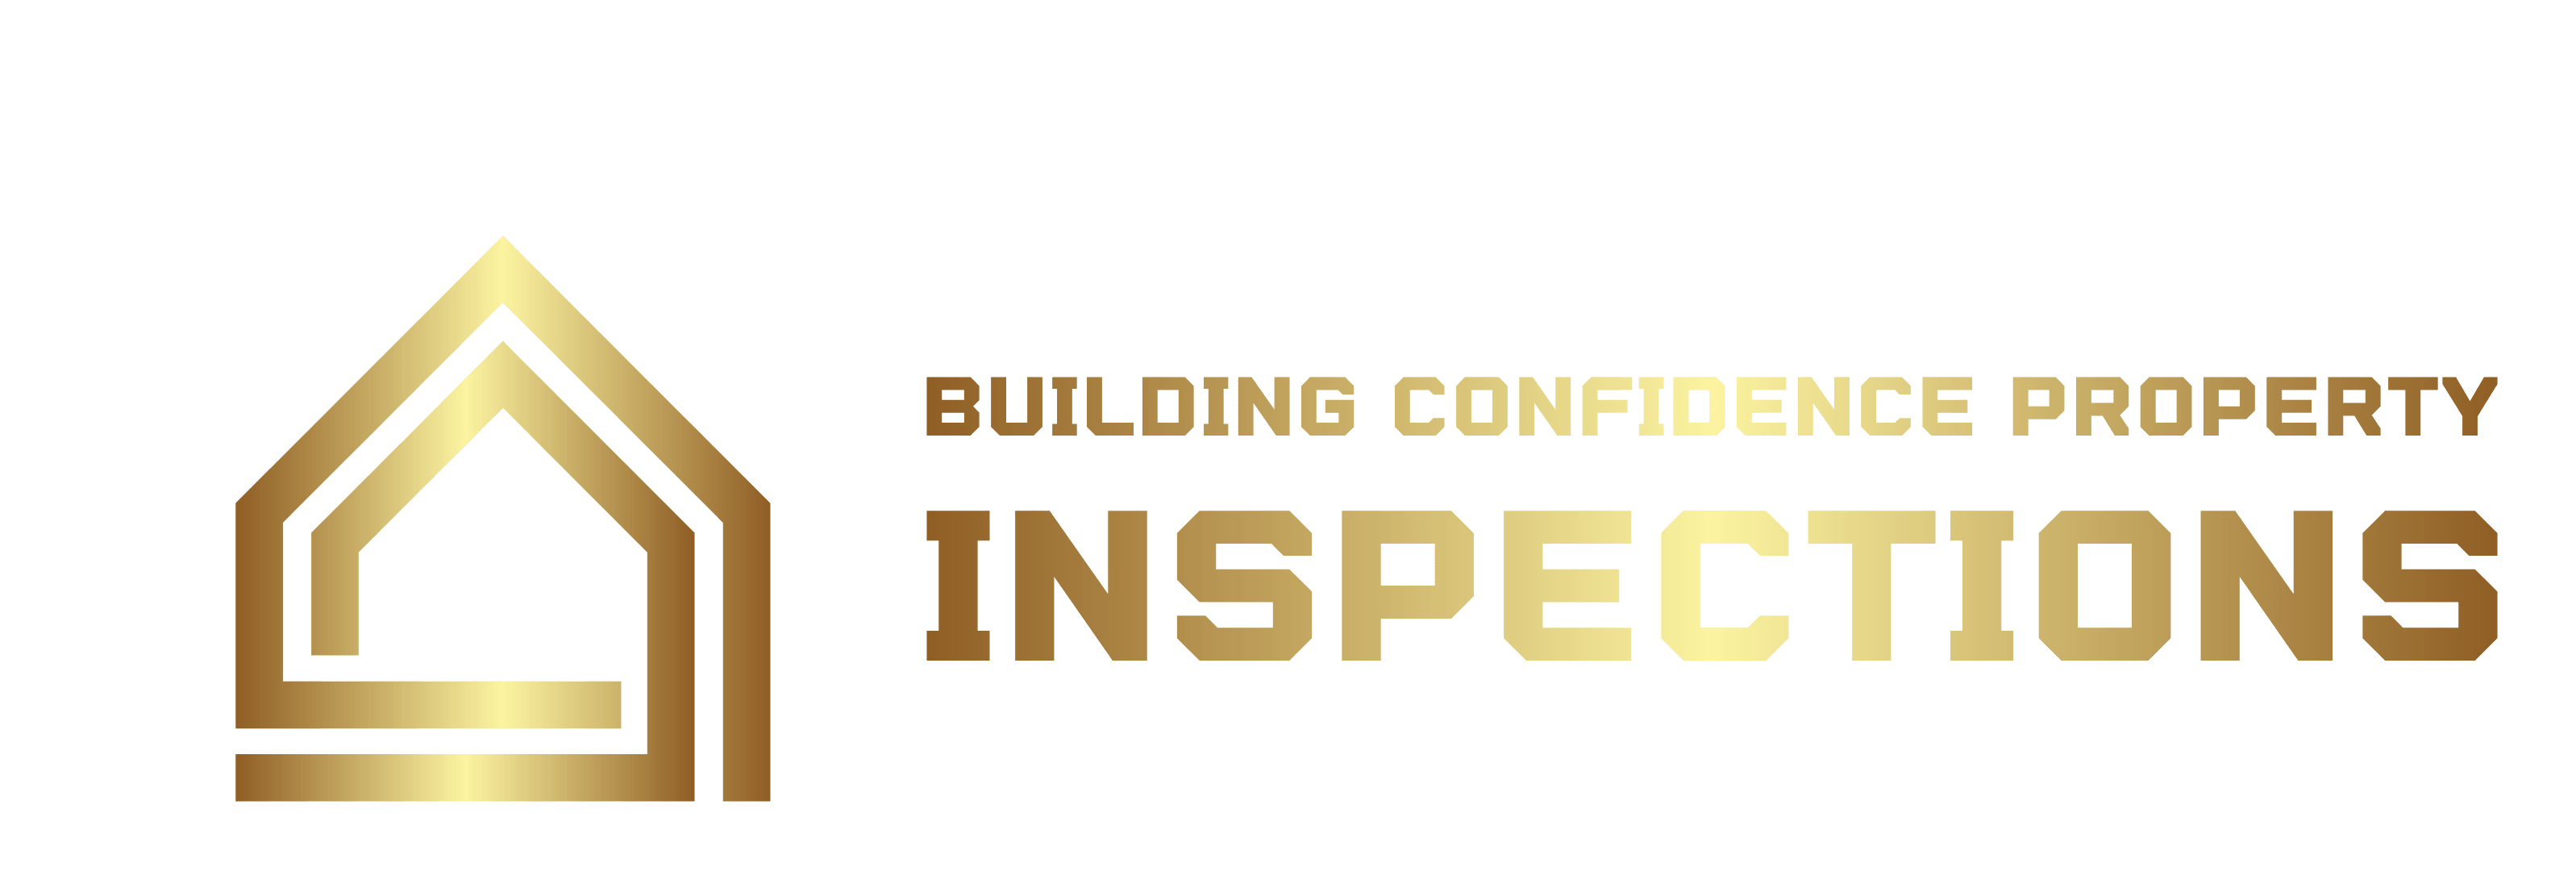 Building Confidence Property Inspections Logo